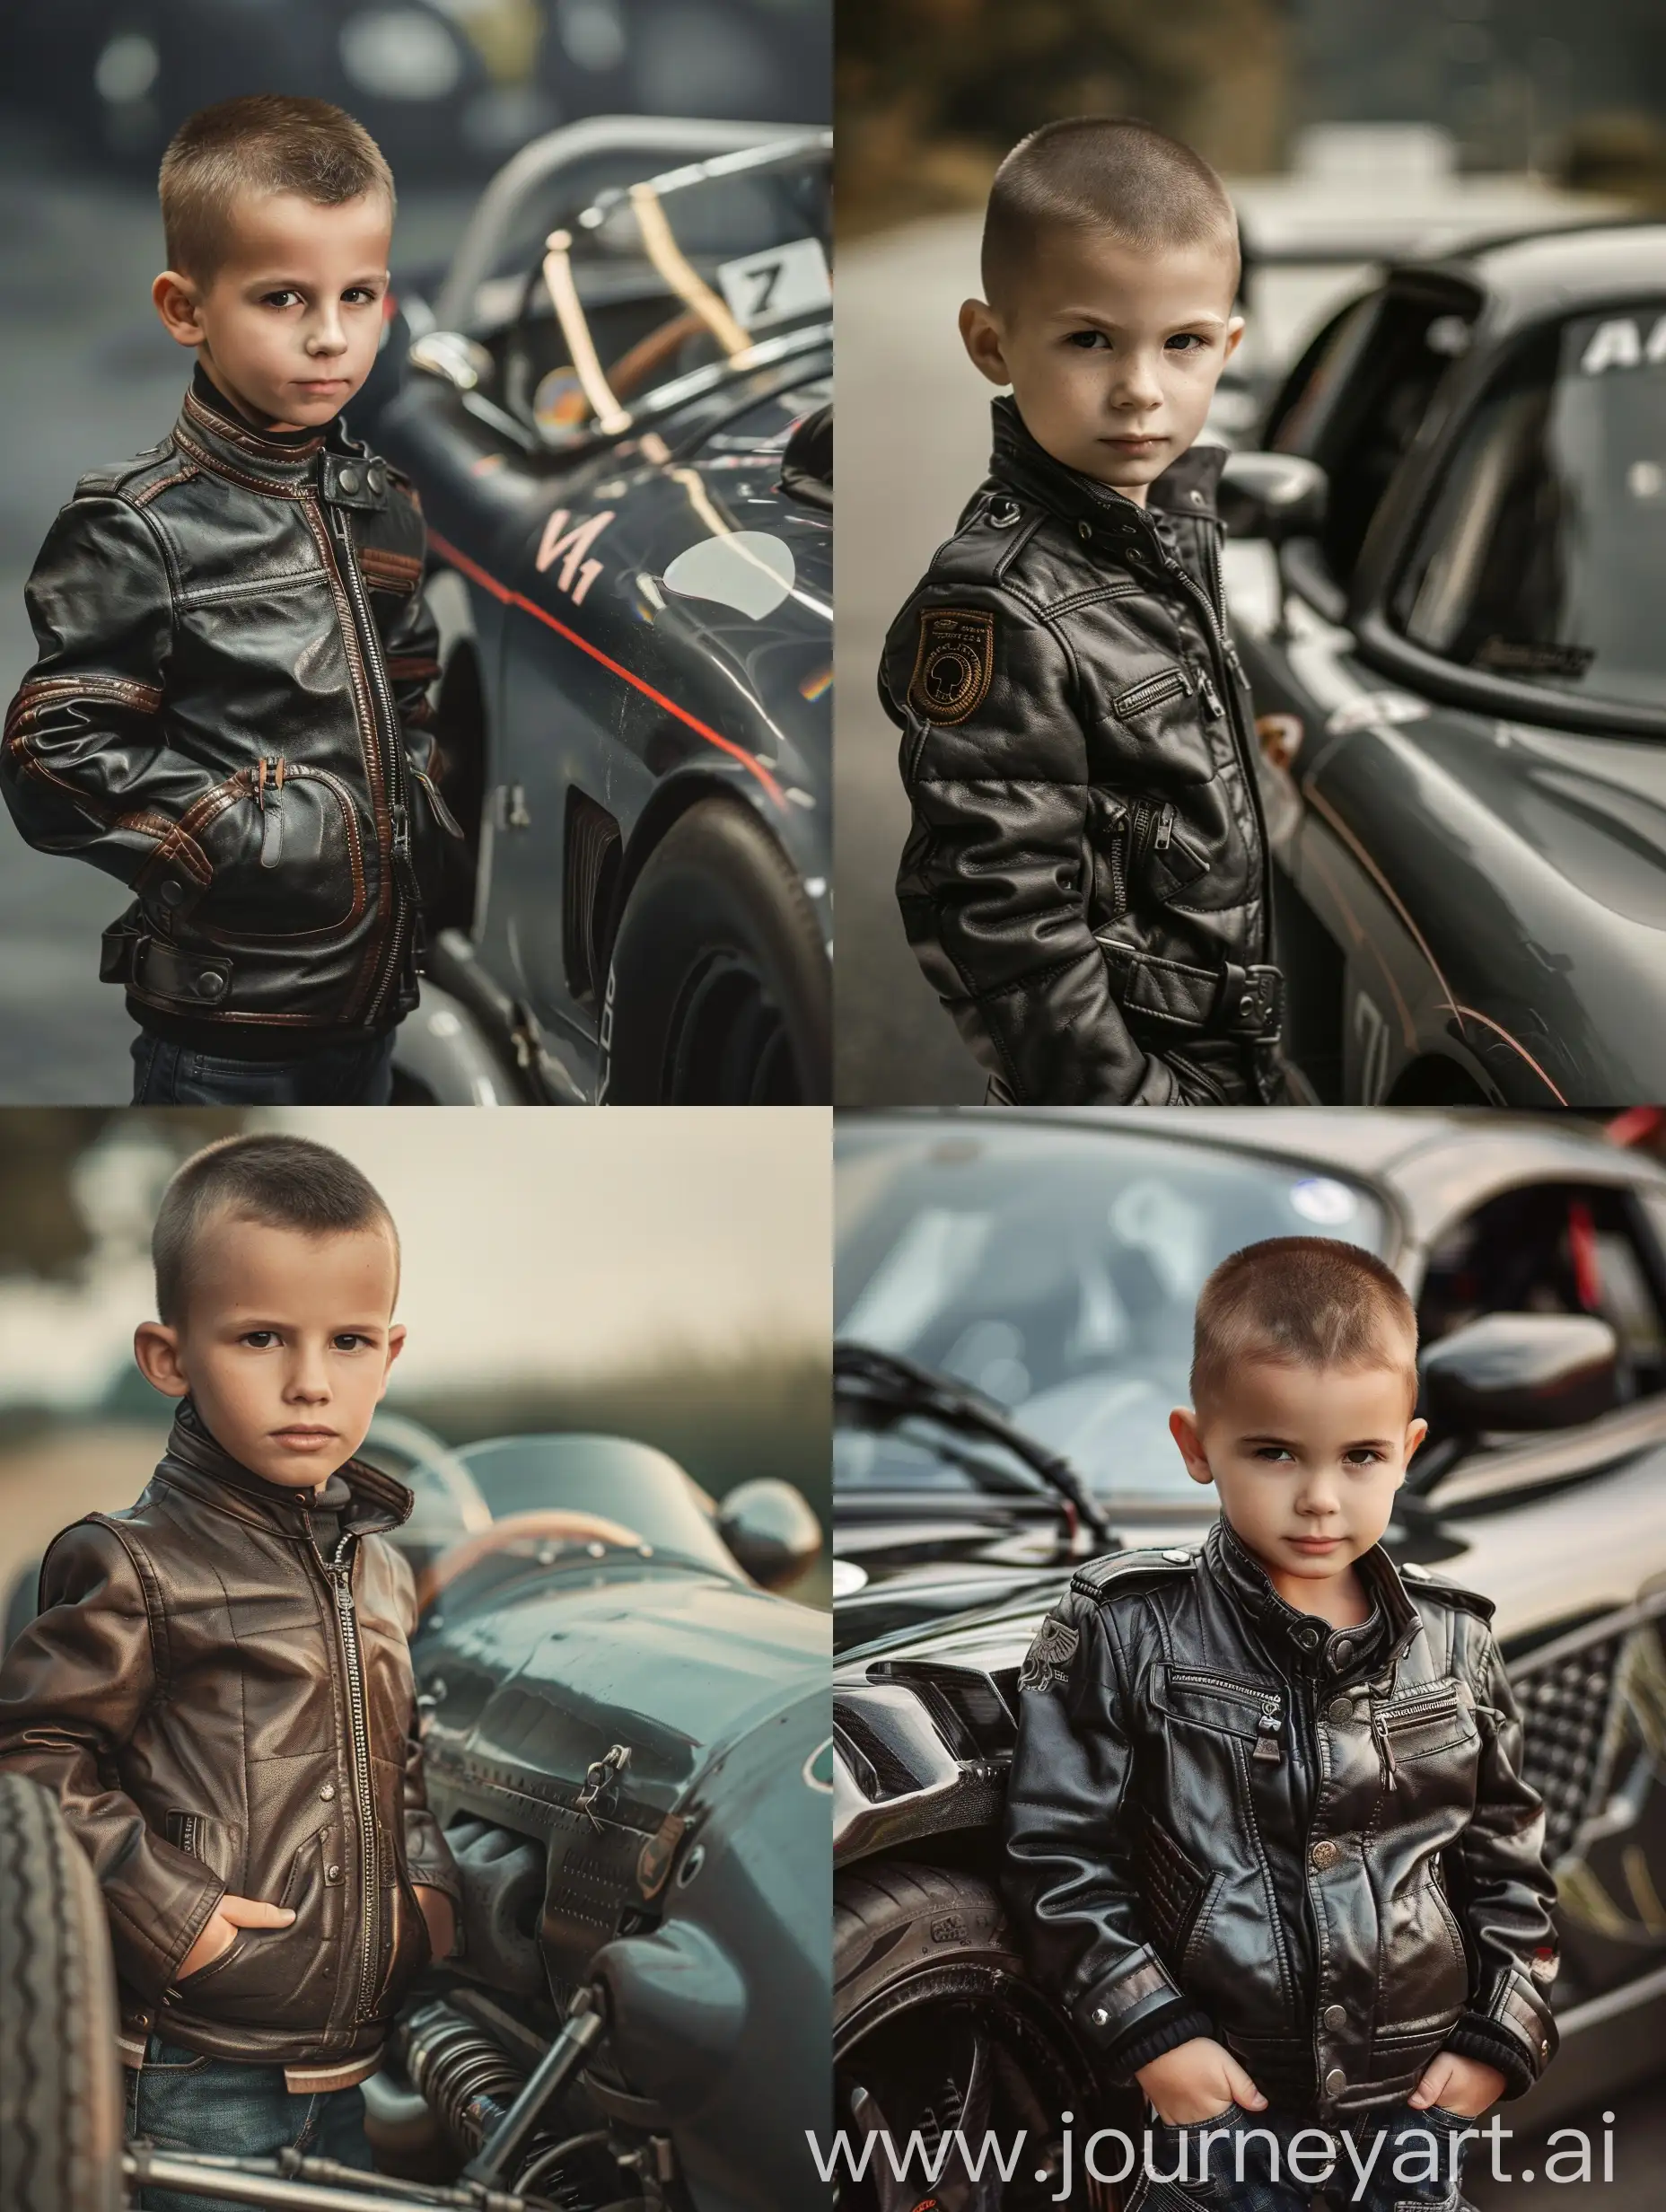 A little boy with short hair, dressed in a leather jacket, seven years old, hands in pockets, standing next to a coolly tuned racing car,realistic photo, hyperrealism, face clearly visible, looking at the camera, view from afar